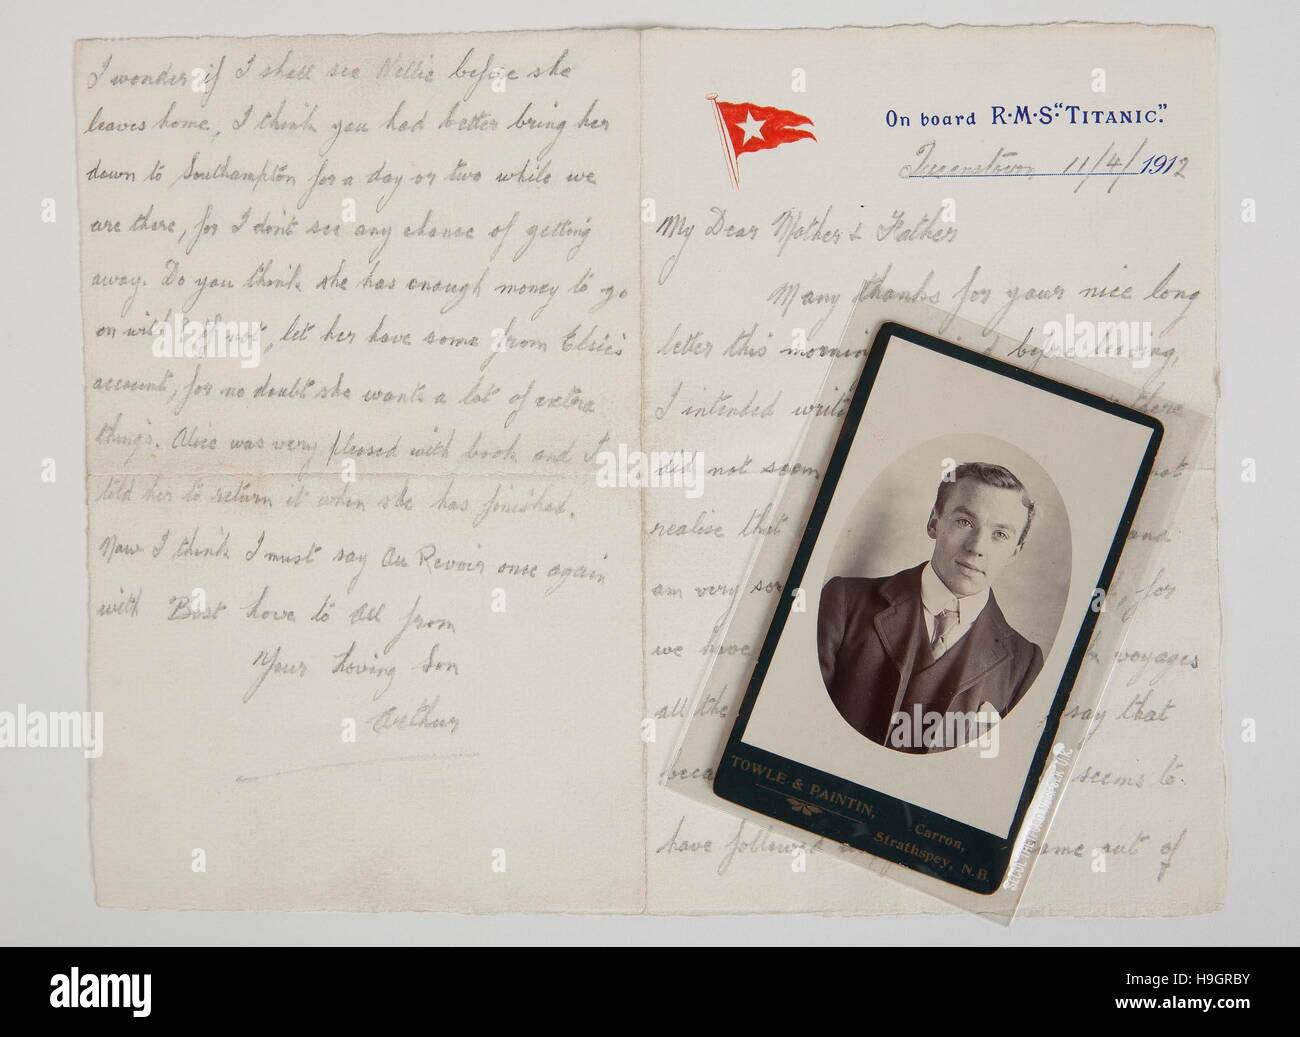 An extremely rare letter written by James Paintin, steward to Titanic captain E.J. Smith, along with a photograph of Paintin that is being auctioned off at Henry Aldridge & Son auction house in Devizes, Wiltshire, in one of their 100th Anniversary Titanic sales this Saturday. 27 March 2012.  Photo by Adam Gasson. Stock Photo